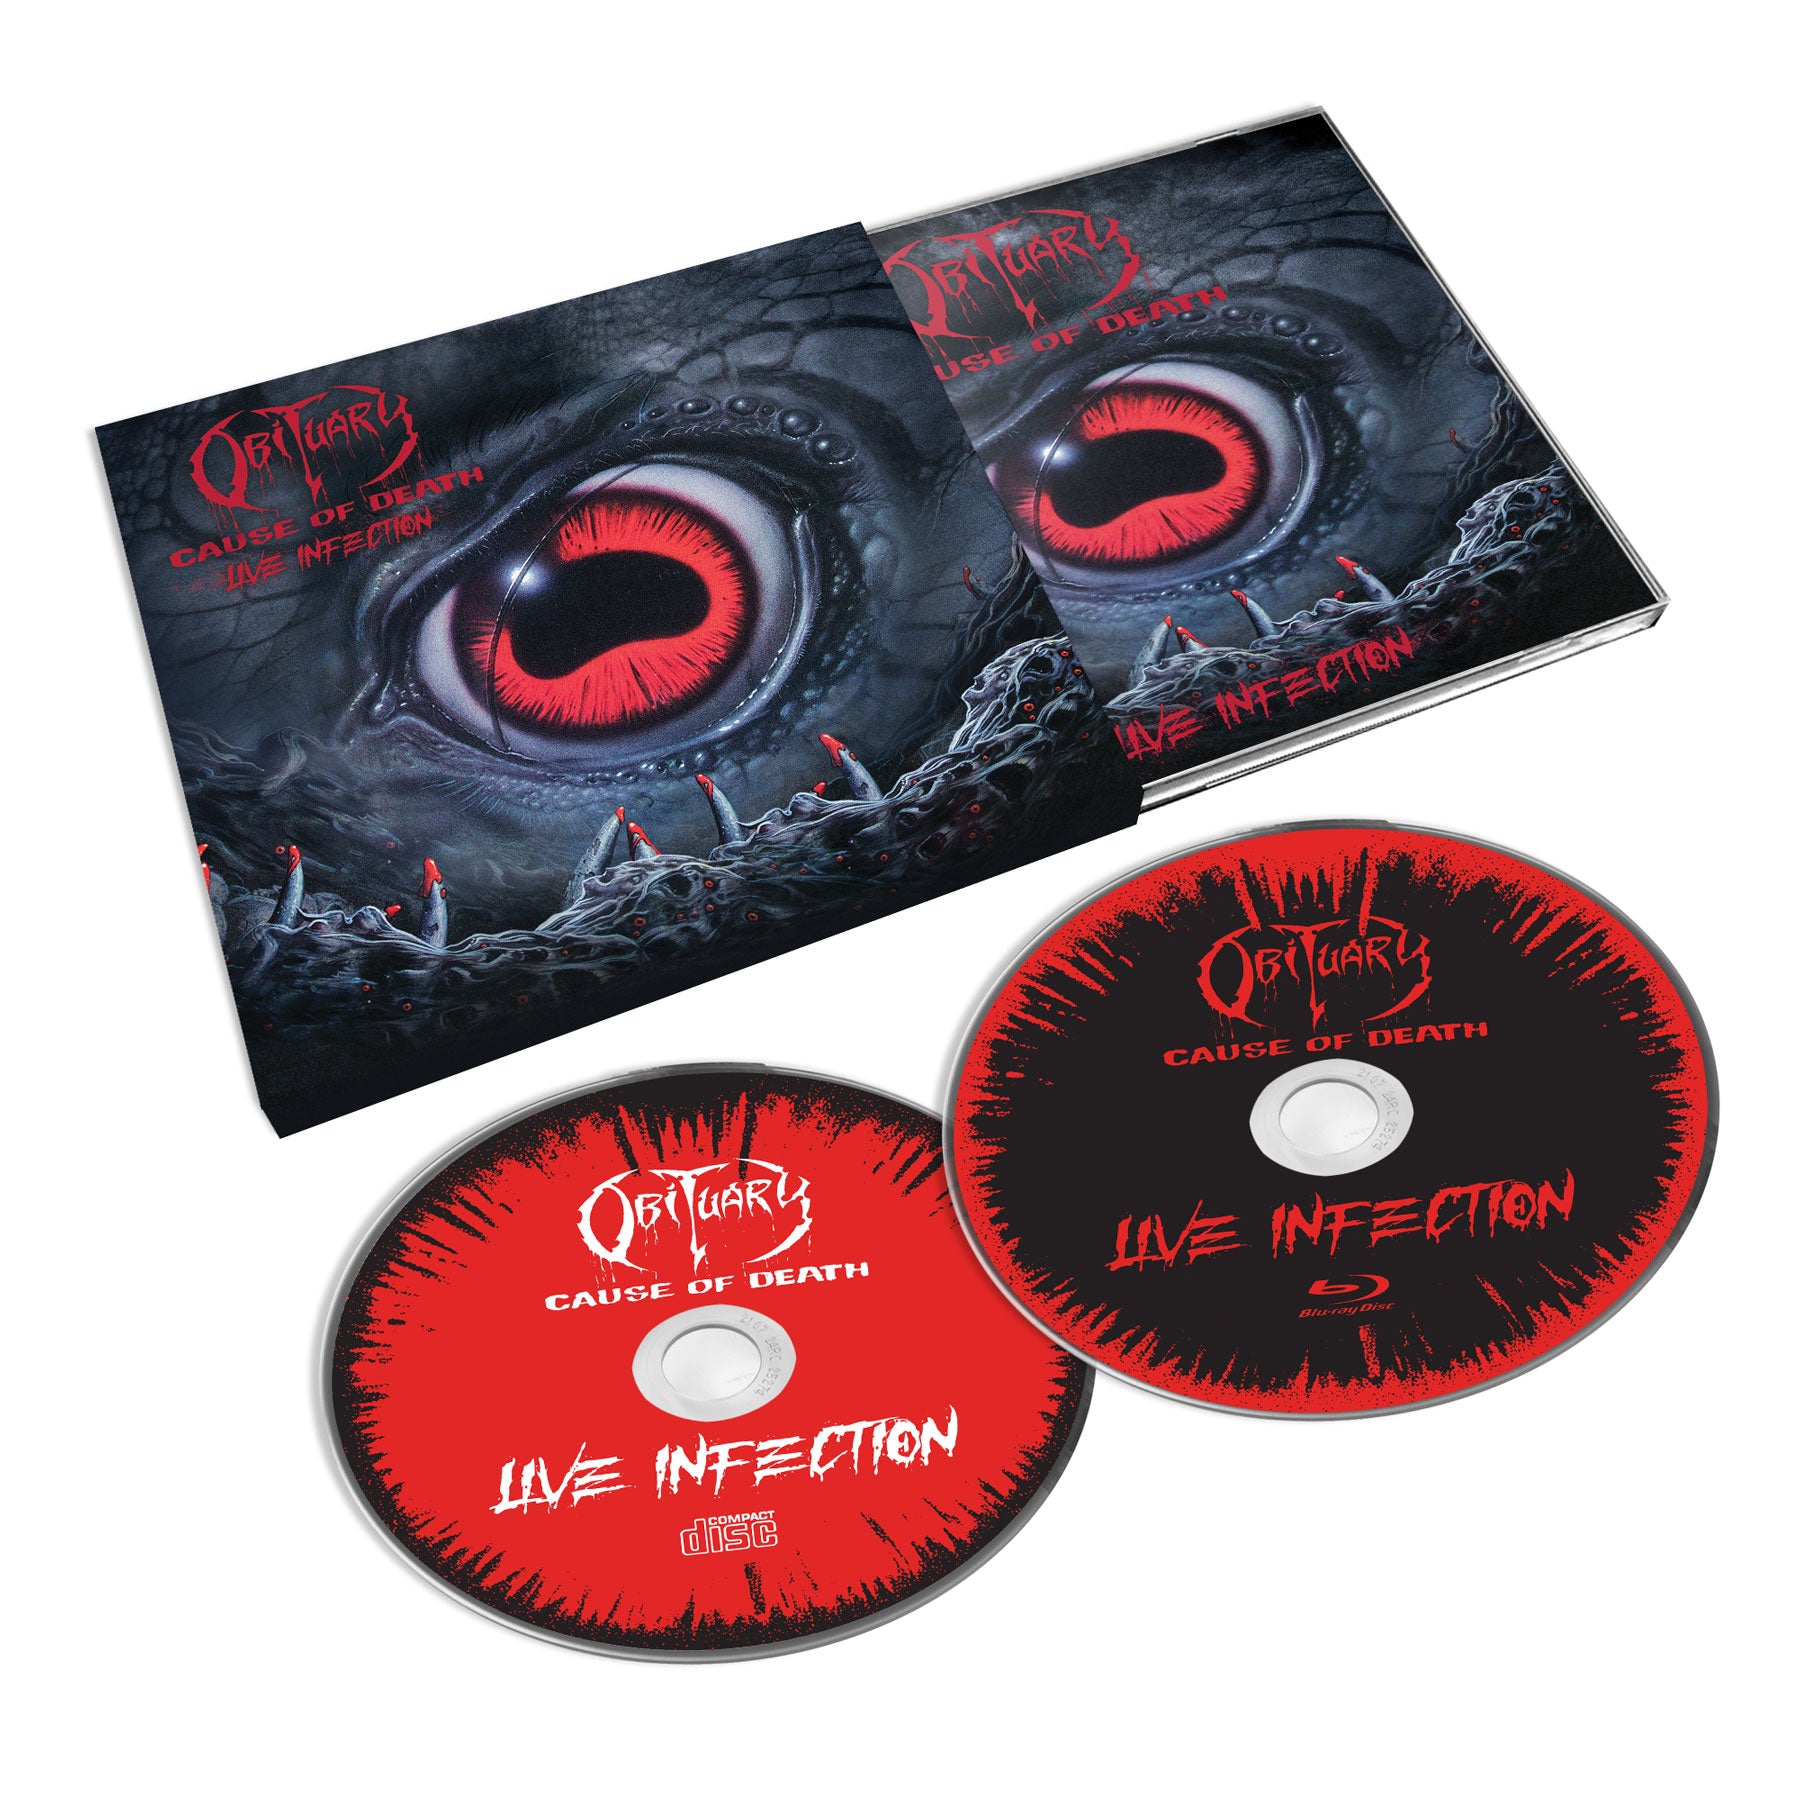 Obituary "Cause of Death - Live Infection" Blu-ray/CD